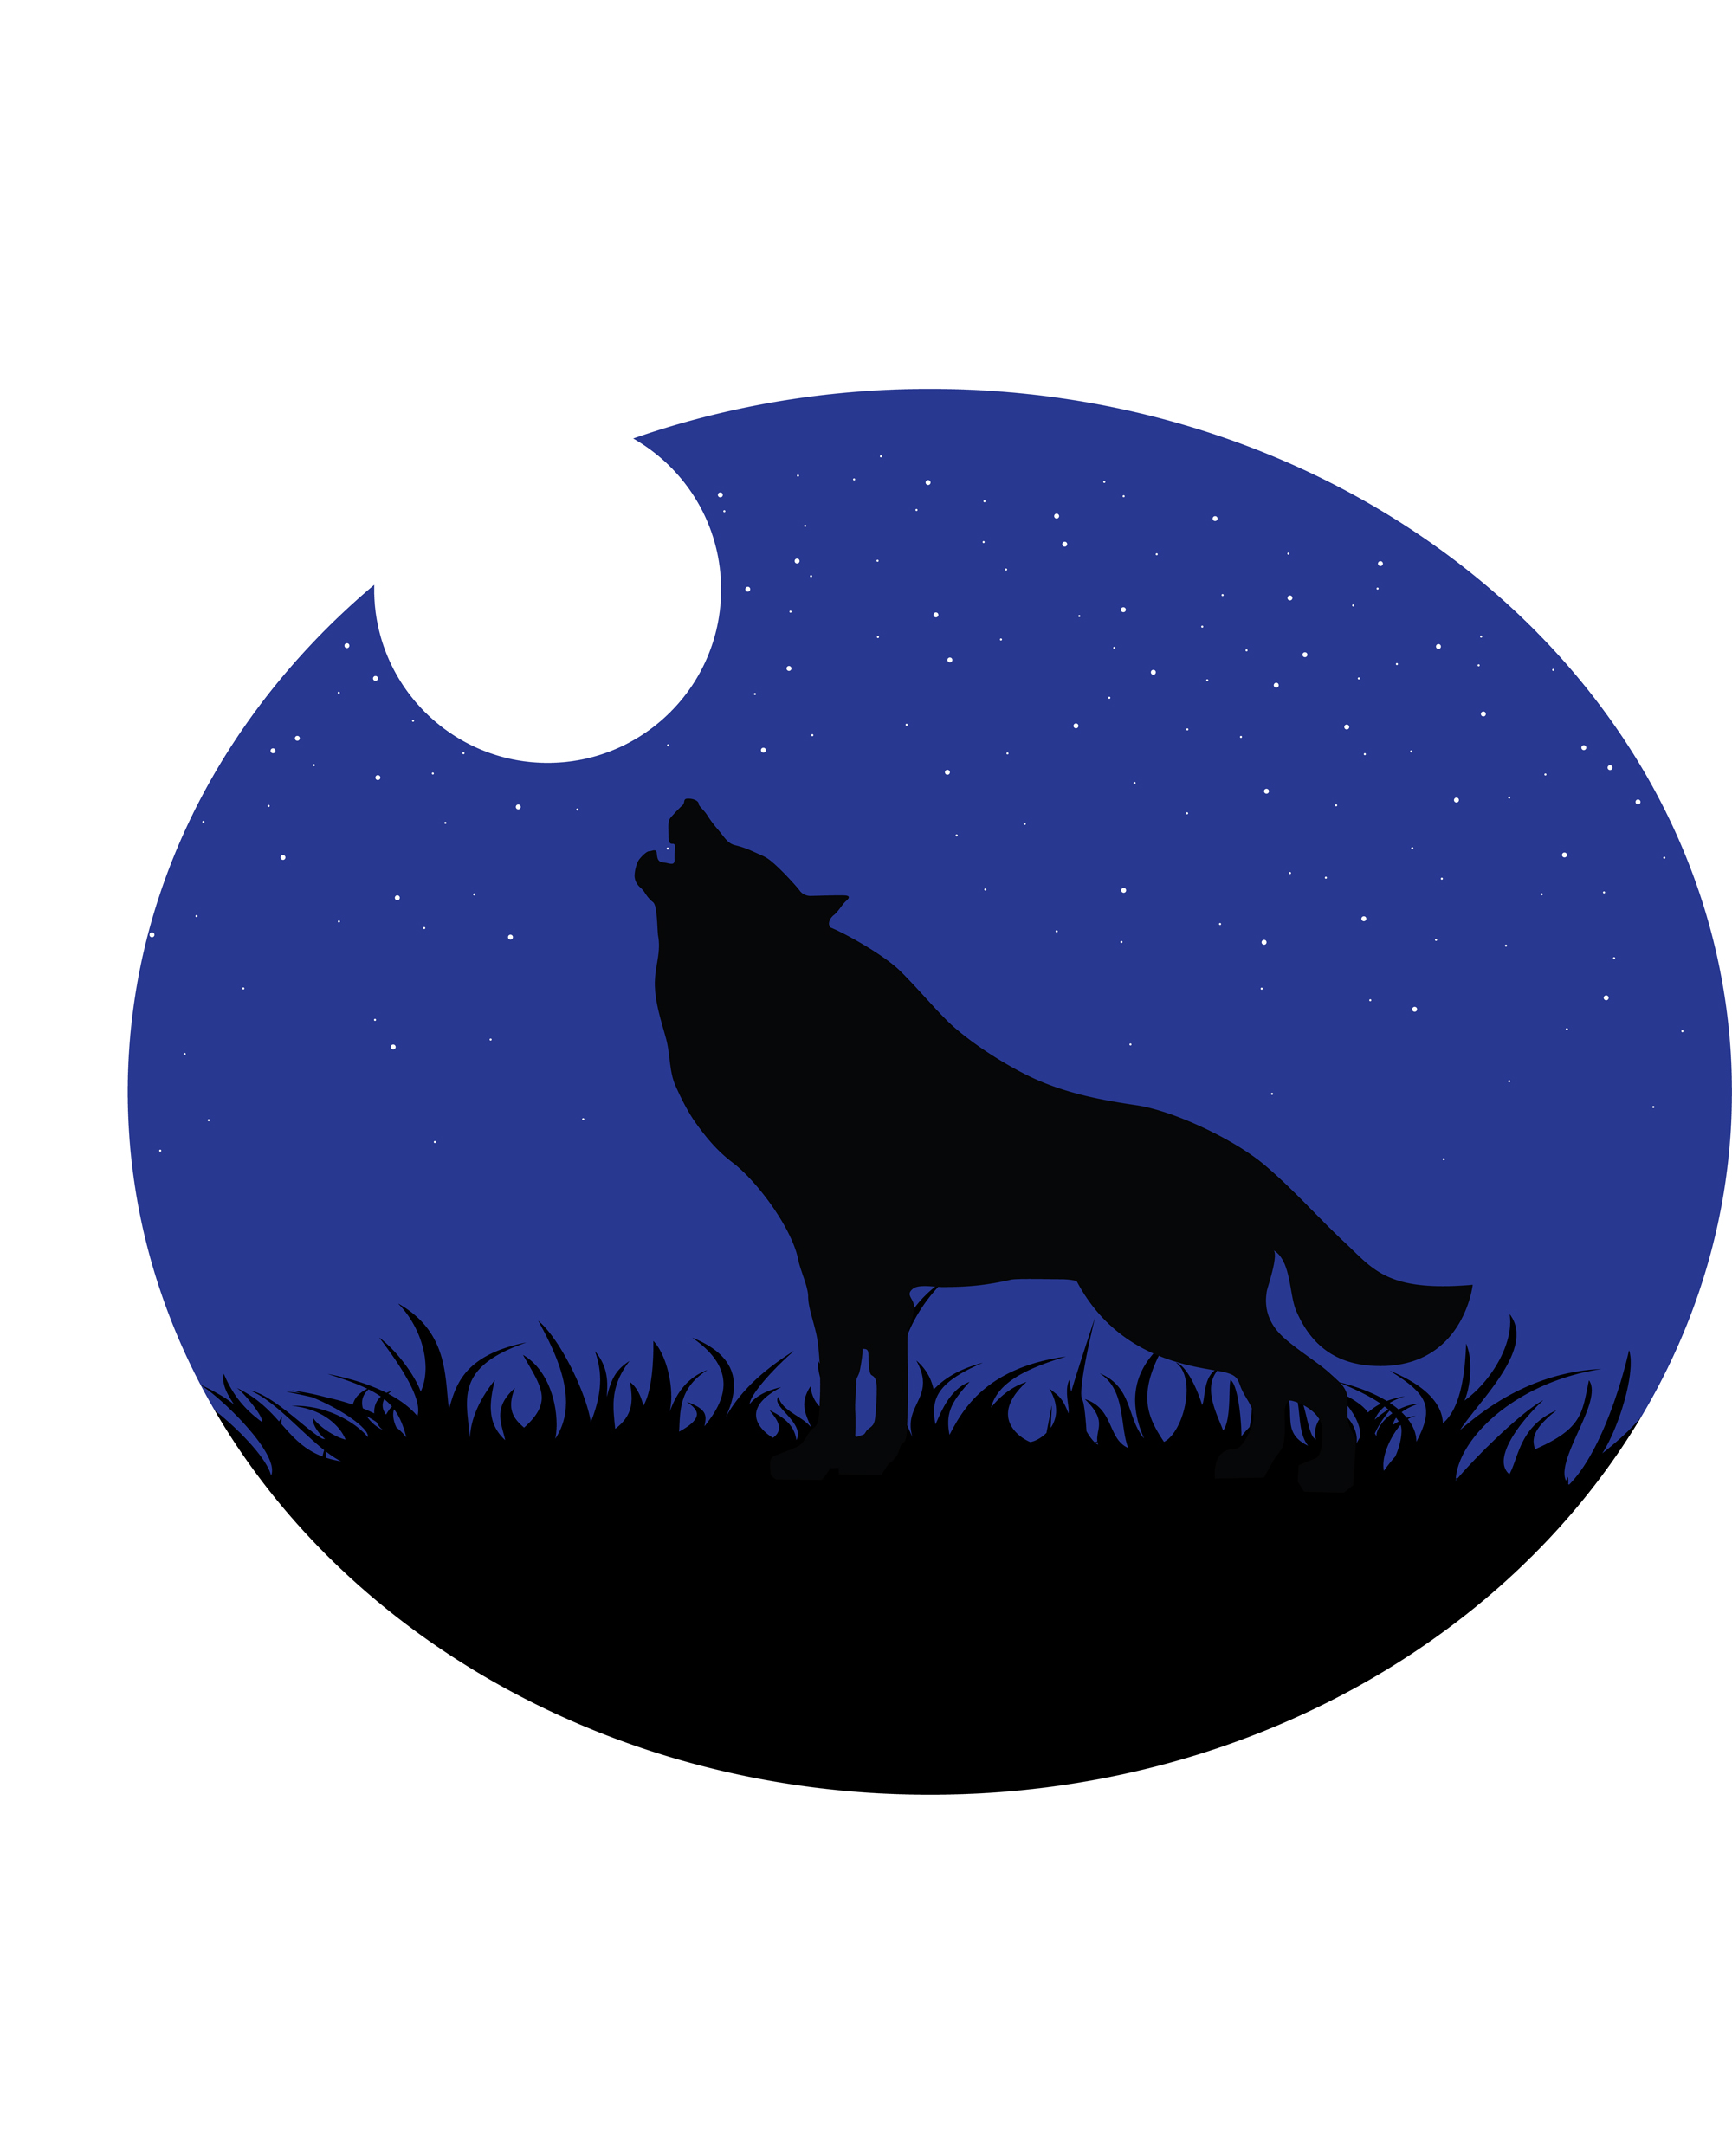 Picture Of A Wolf Howling At The Moon - ClipArt Best